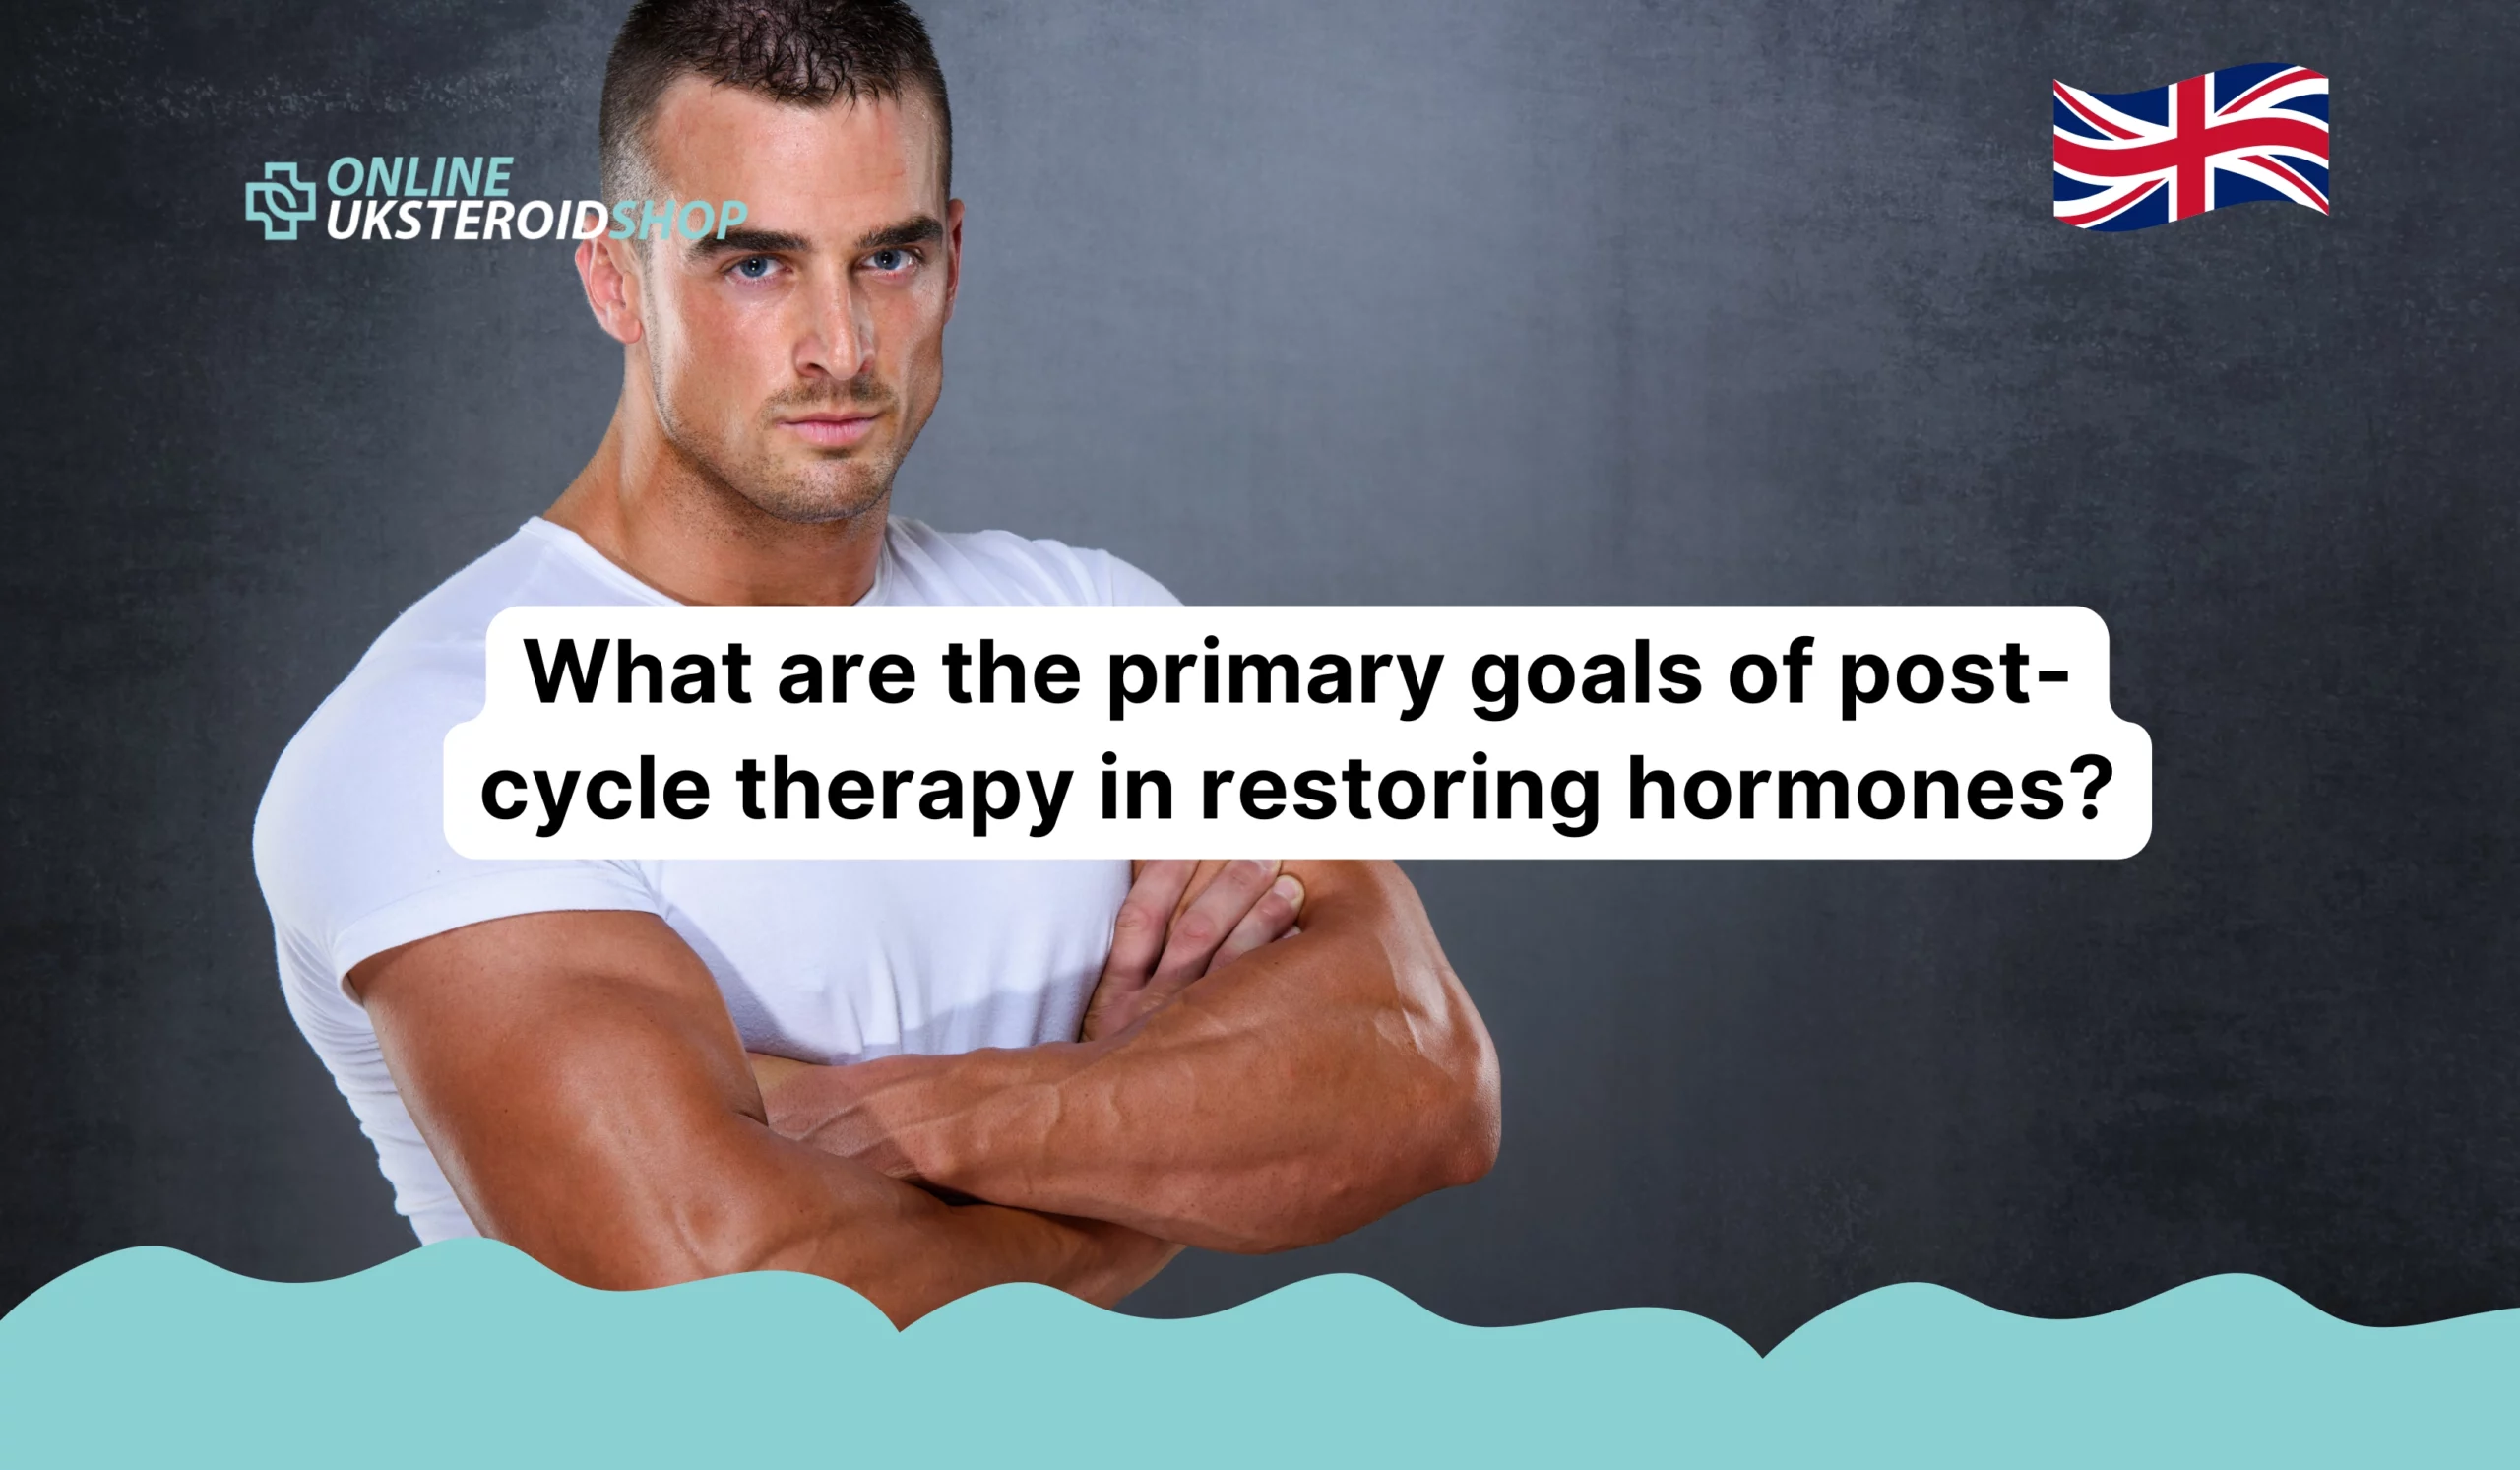 What are the primary goals of post-cycle therapy in restoring hormones?